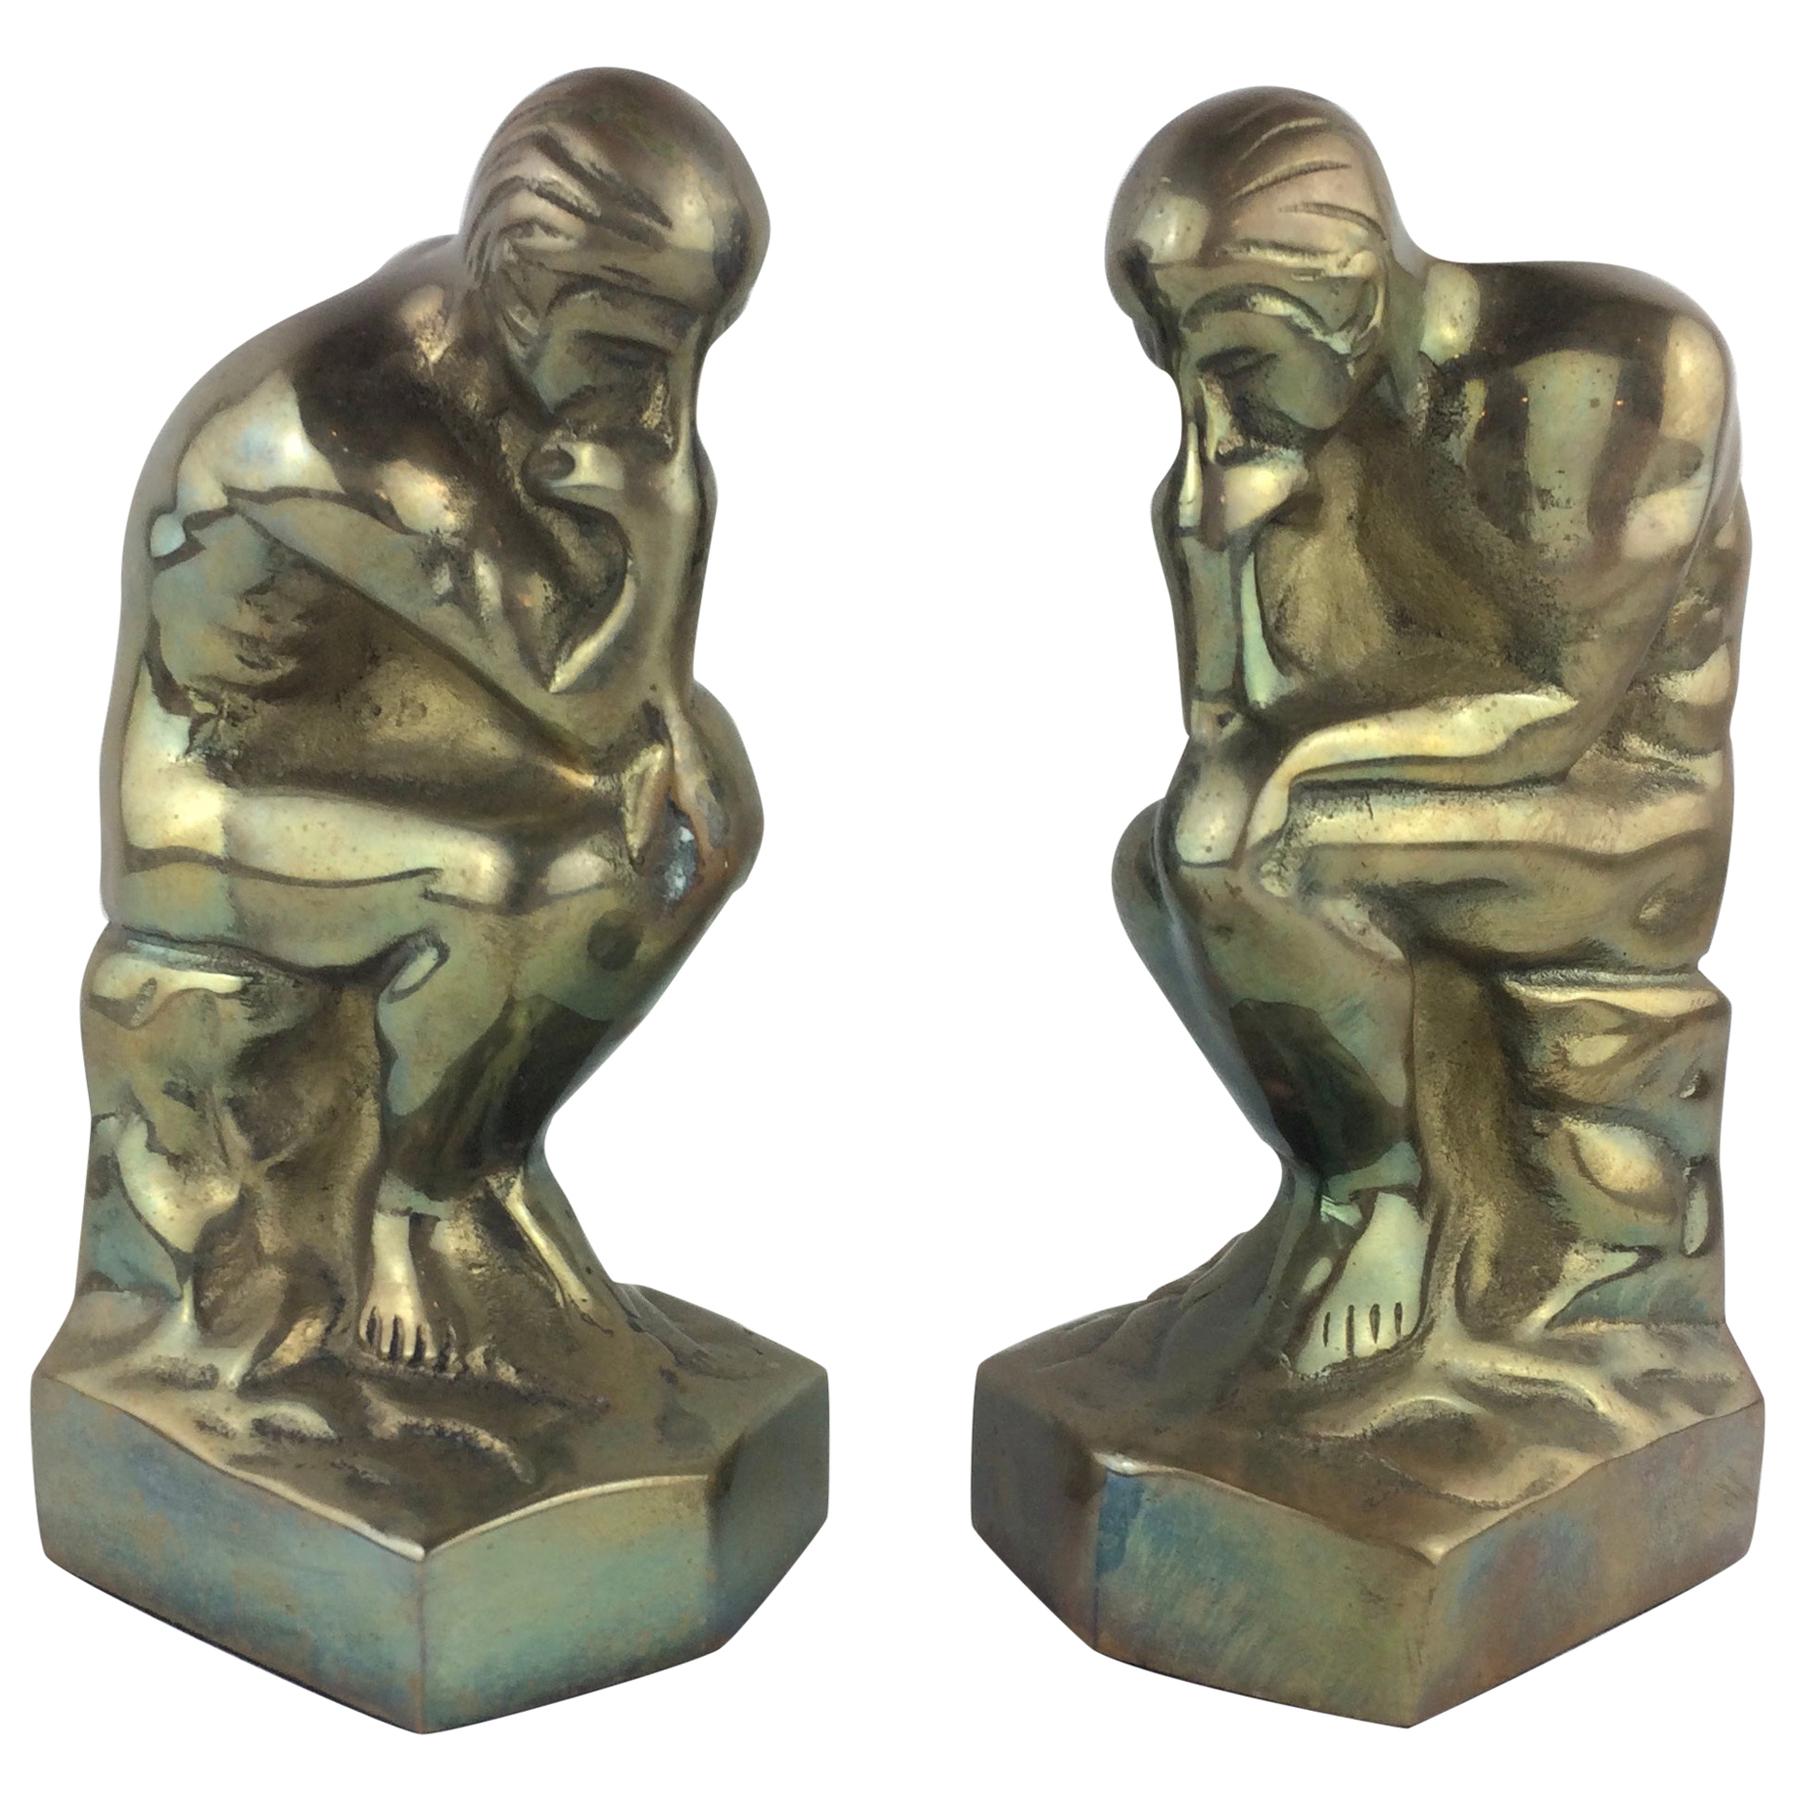 Pair of Sculptural Art Deco Brass Bookends after Auguste Rodin The Thinker